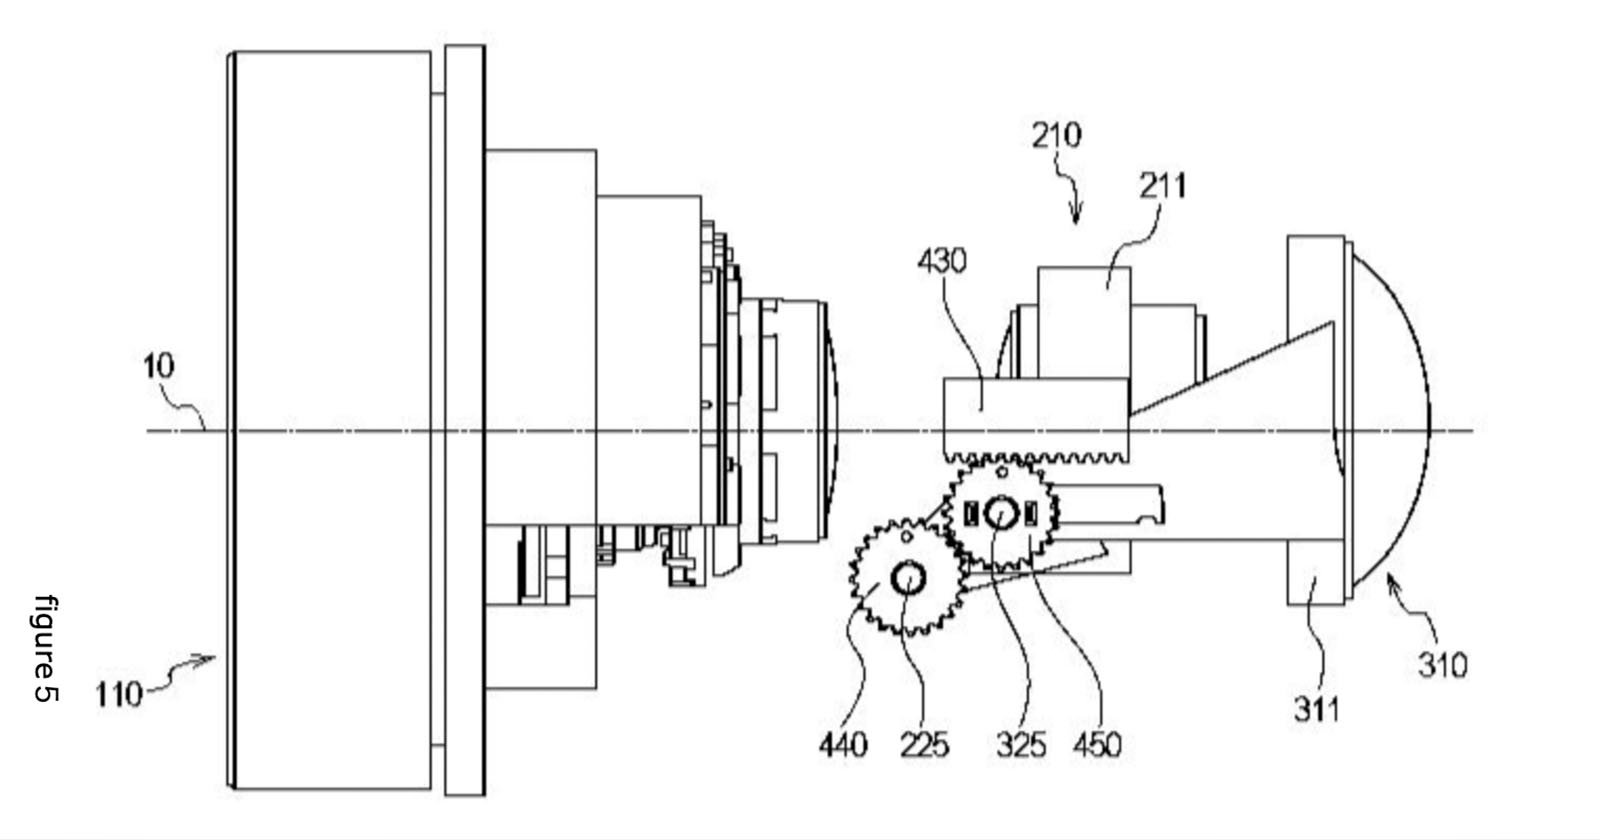 Canons Latest Lens Patent is One of the Weirdest Designs Weve Ever Seen